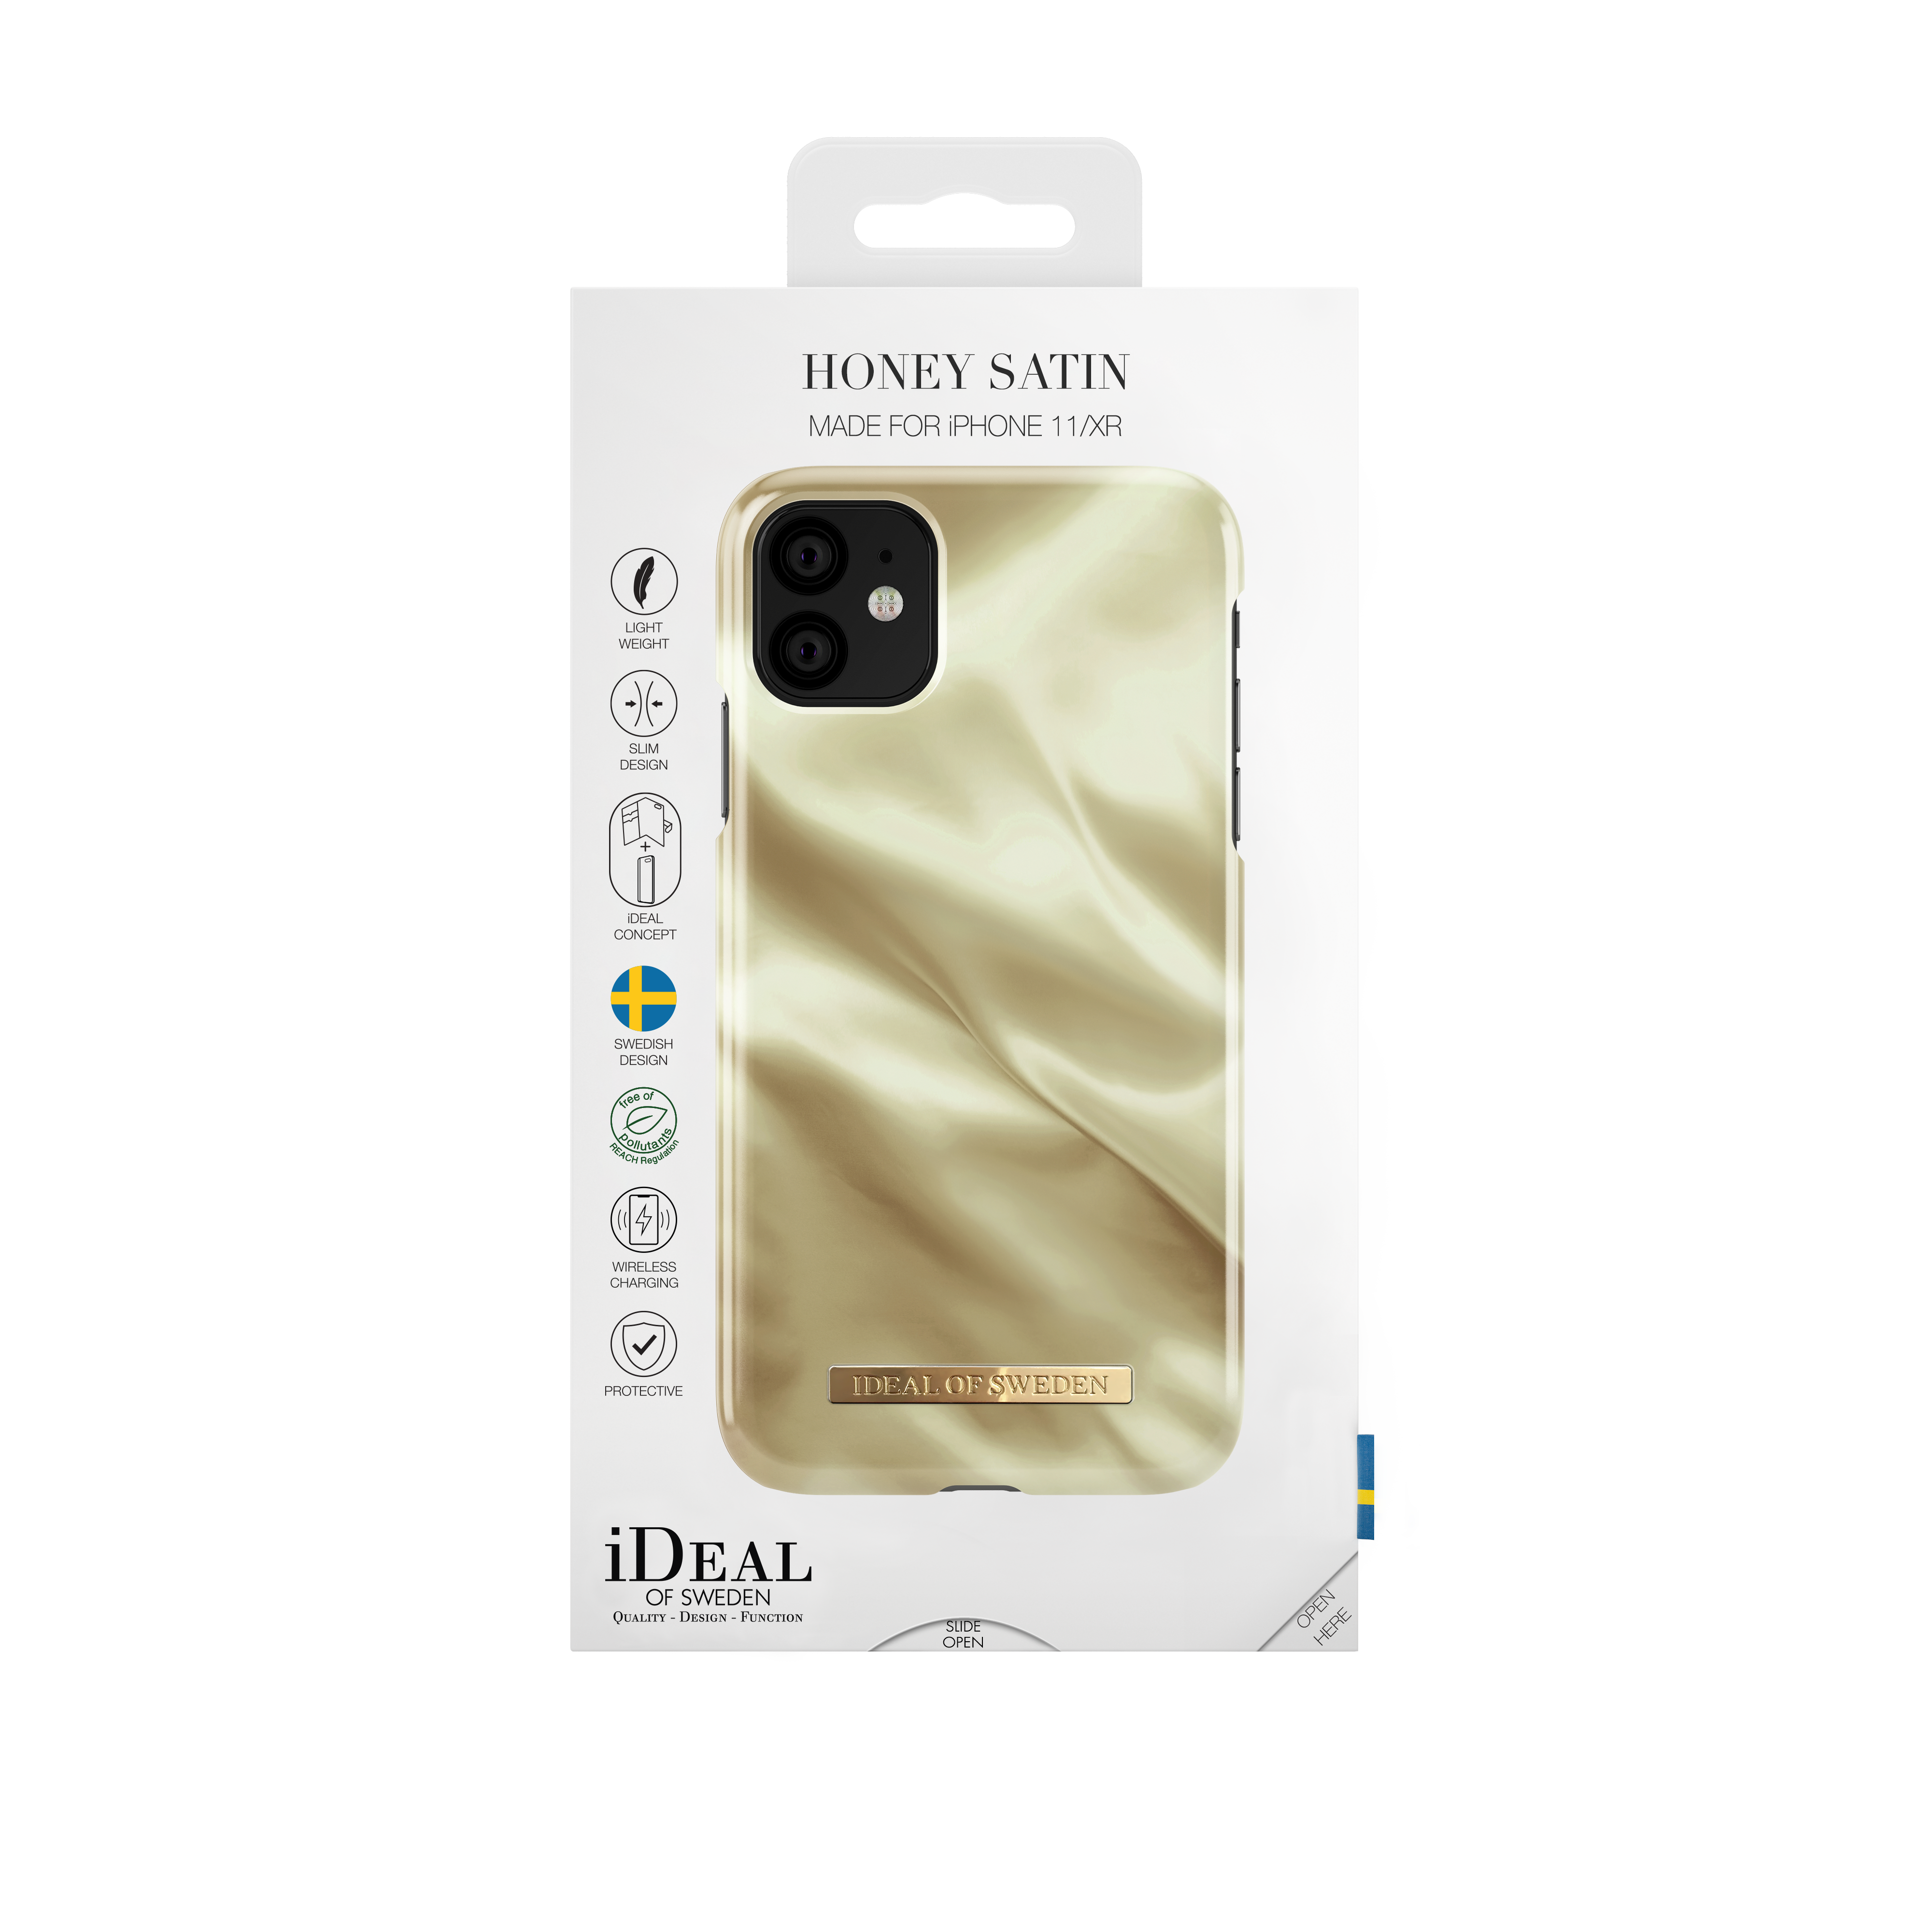 IDEAL OF SWEDEN IDFCSC19-I1961-188, Apple, Honey 11, XR, Satin iPhone iPhone Backcover